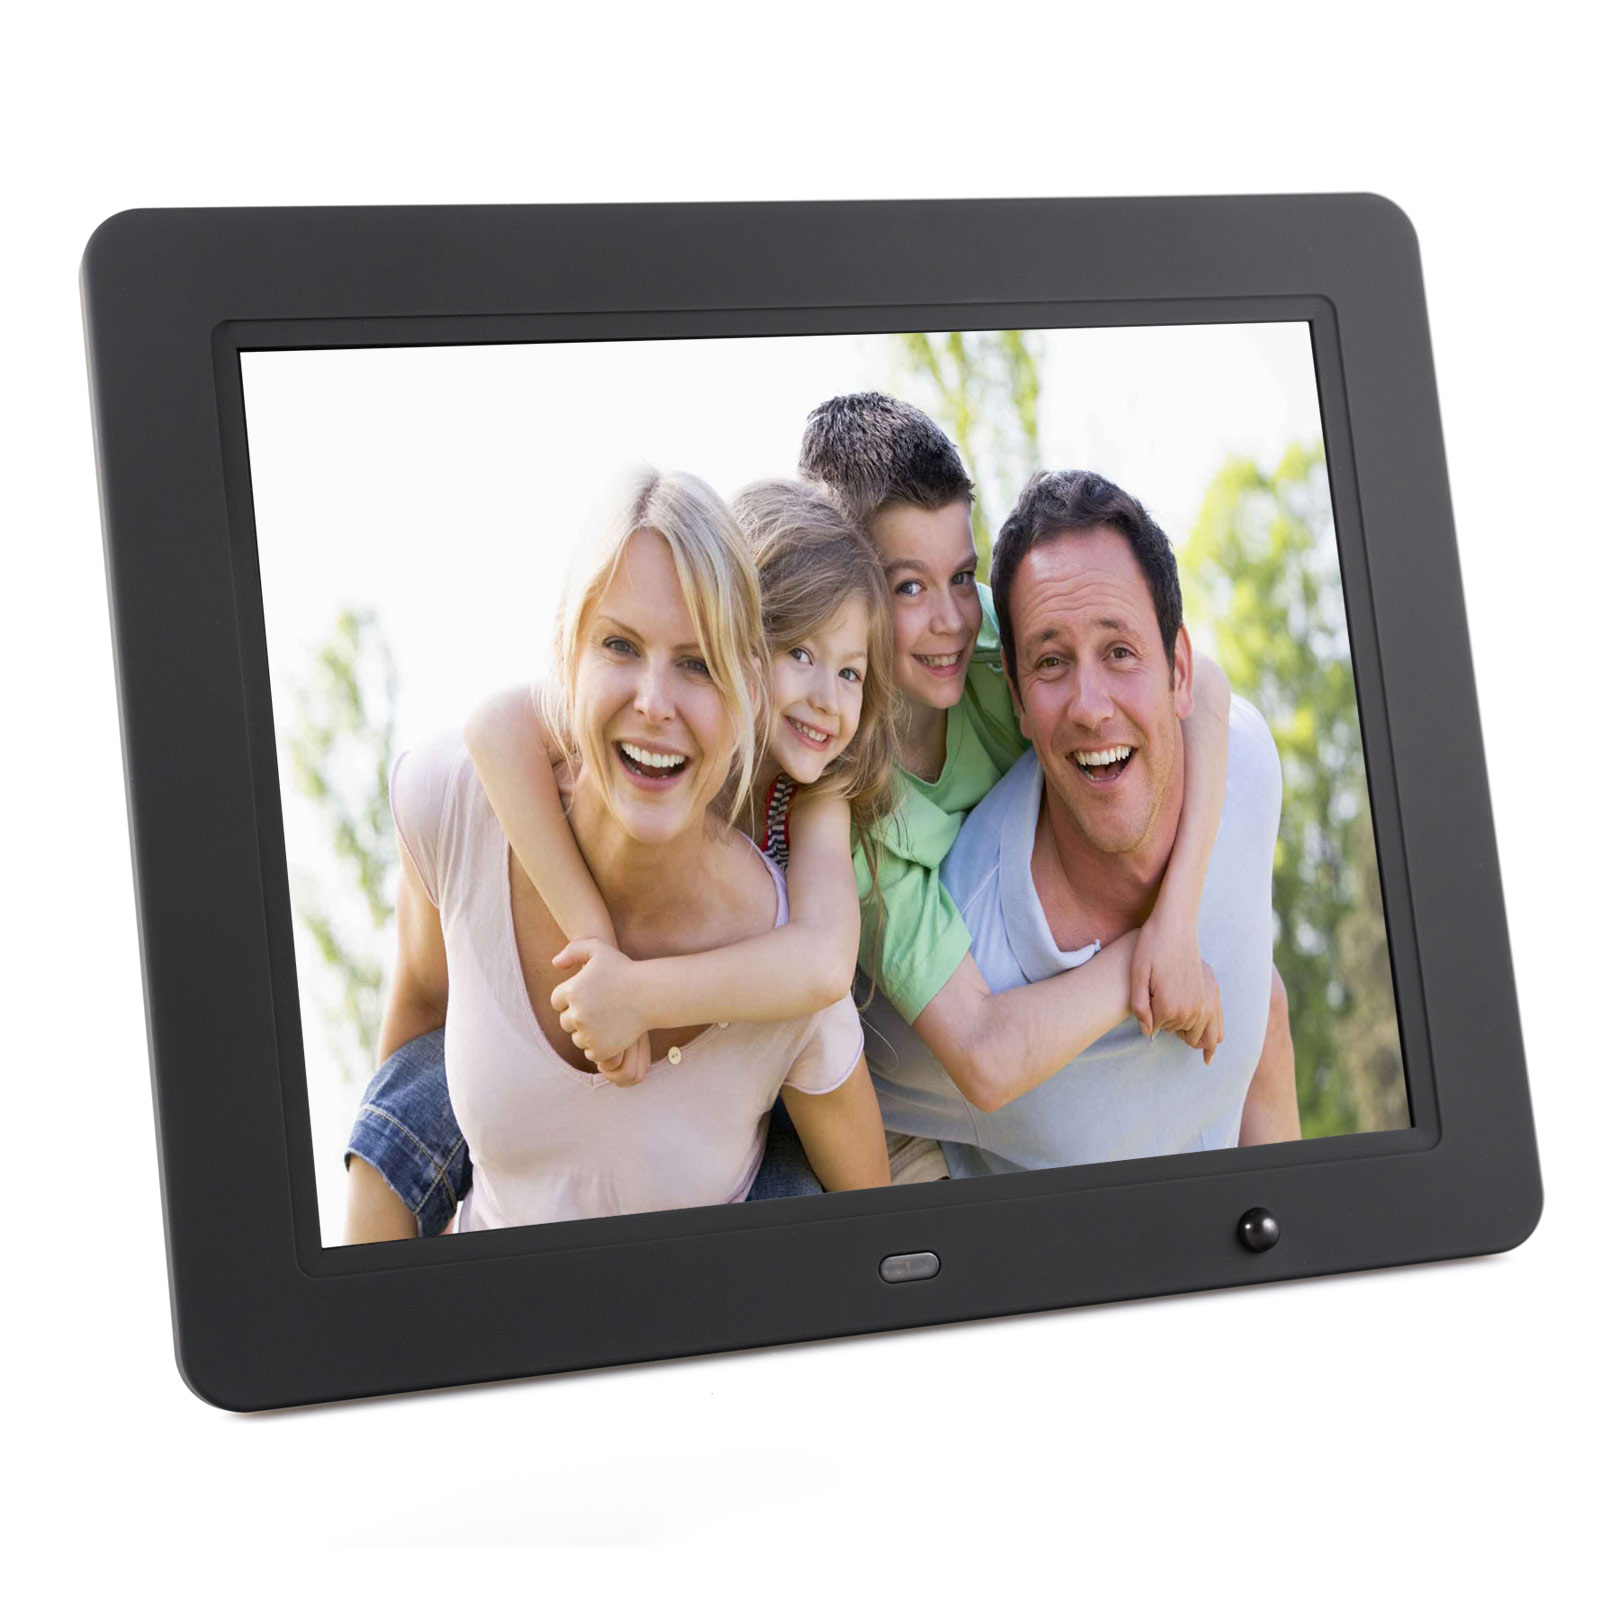 12.1 inch Hi-Resolution Digital Picture Frame with Motion Sensor & 4GB Built-in Memory